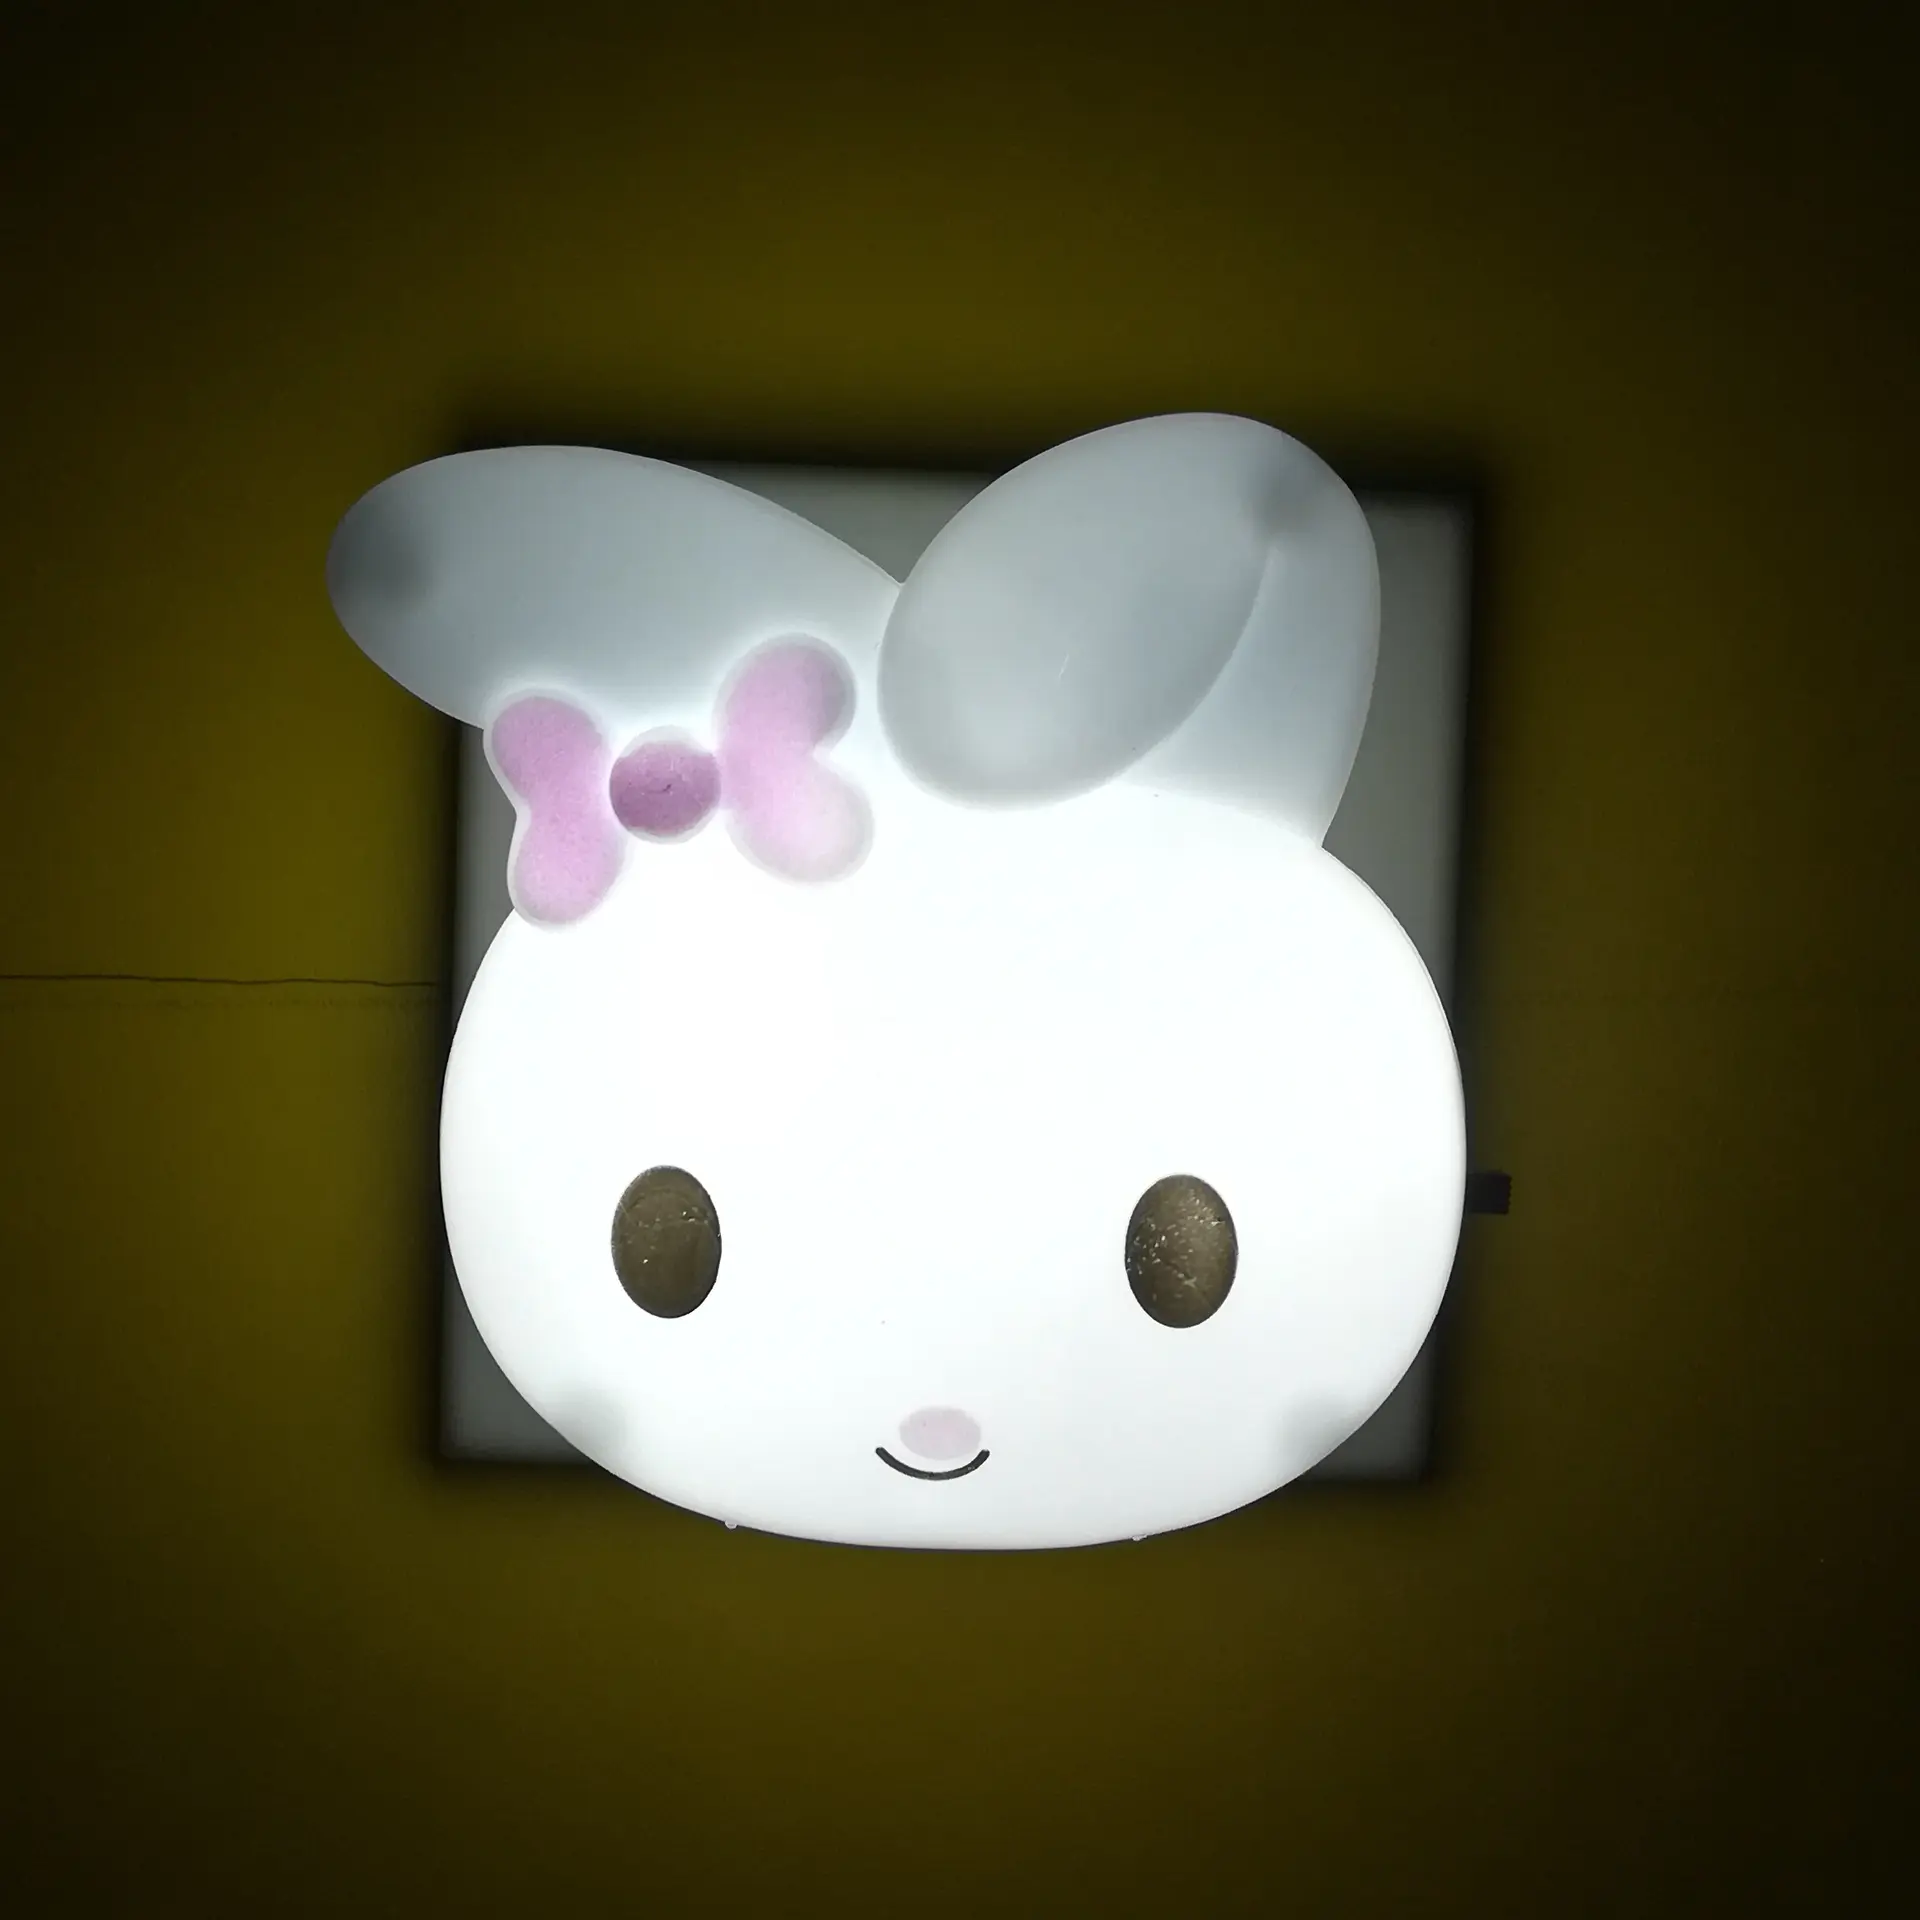 W082 4SMD mini switch plug in rabbit cute ears night light For Baby Bedroom cute gift wall decoration